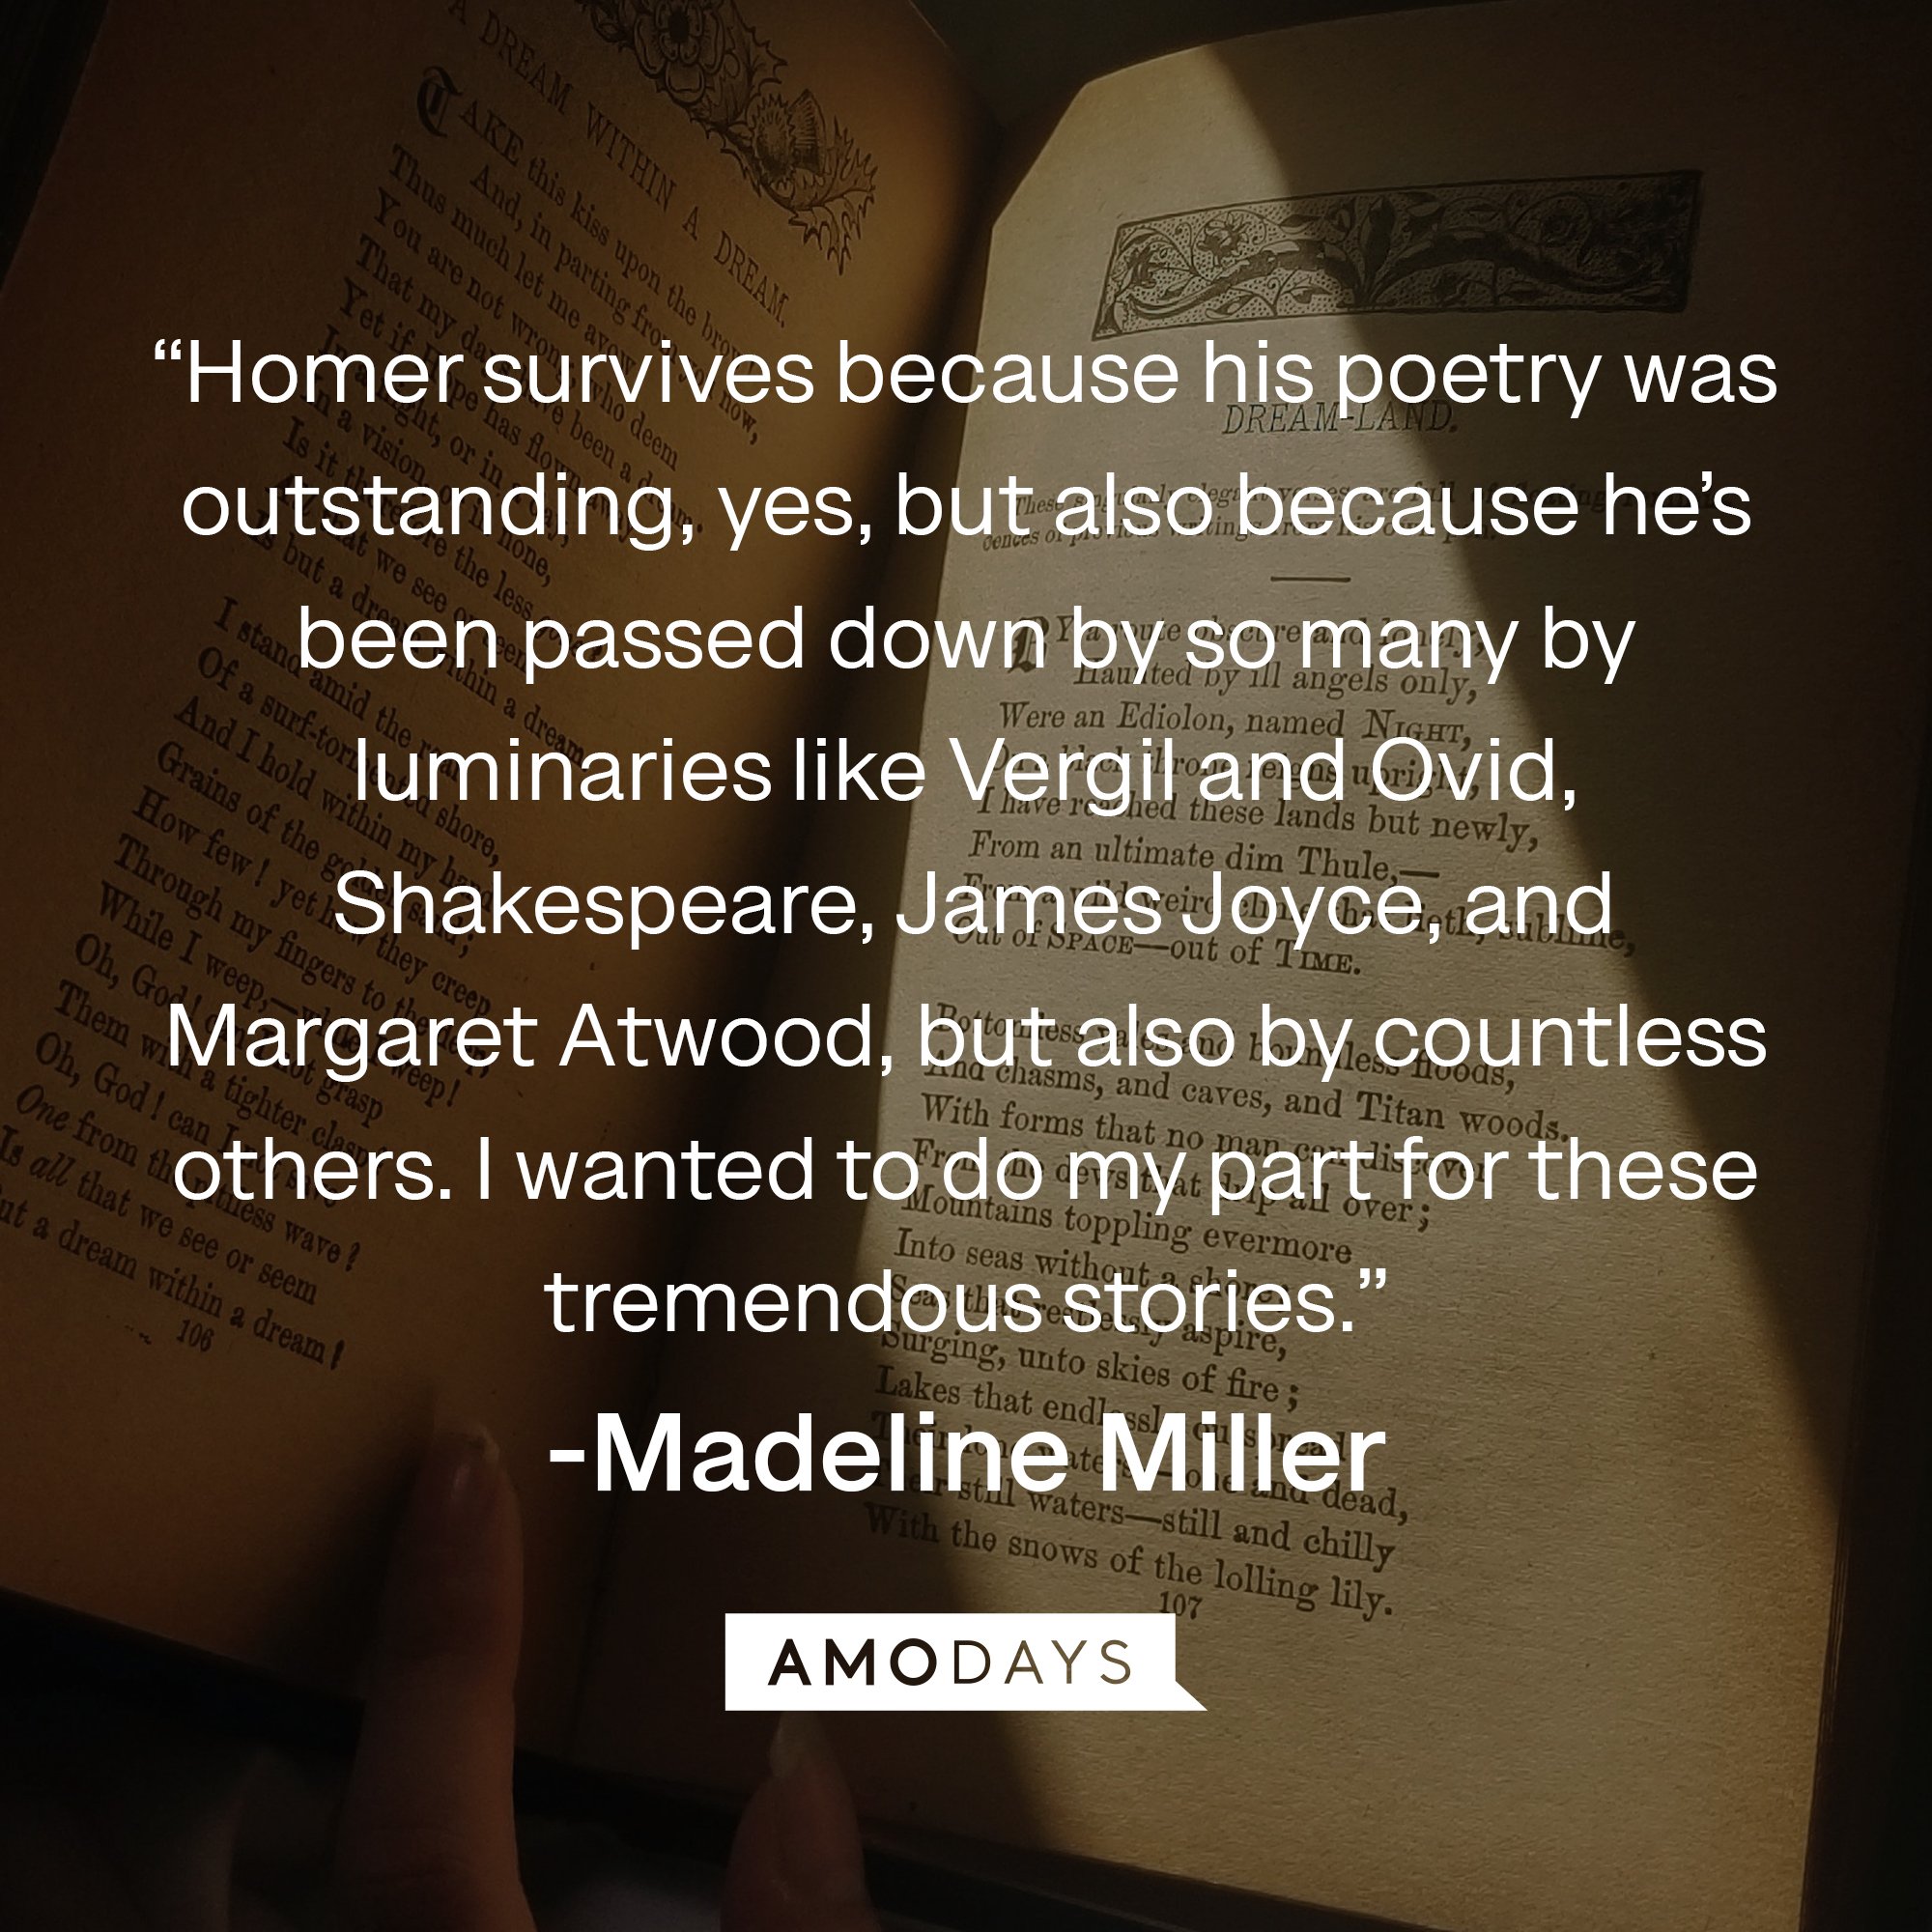 Madeline Miller's quote: “Homer survives because his poetry was outstanding, yes, but also because he’s been passed down by so many by luminaries like Vergil and Ovid, Shakespeare, James Joyce, and Margaret Atwood, but also by countless others. I wanted to do my part for these tremendous stories.” | Image: AmoDays